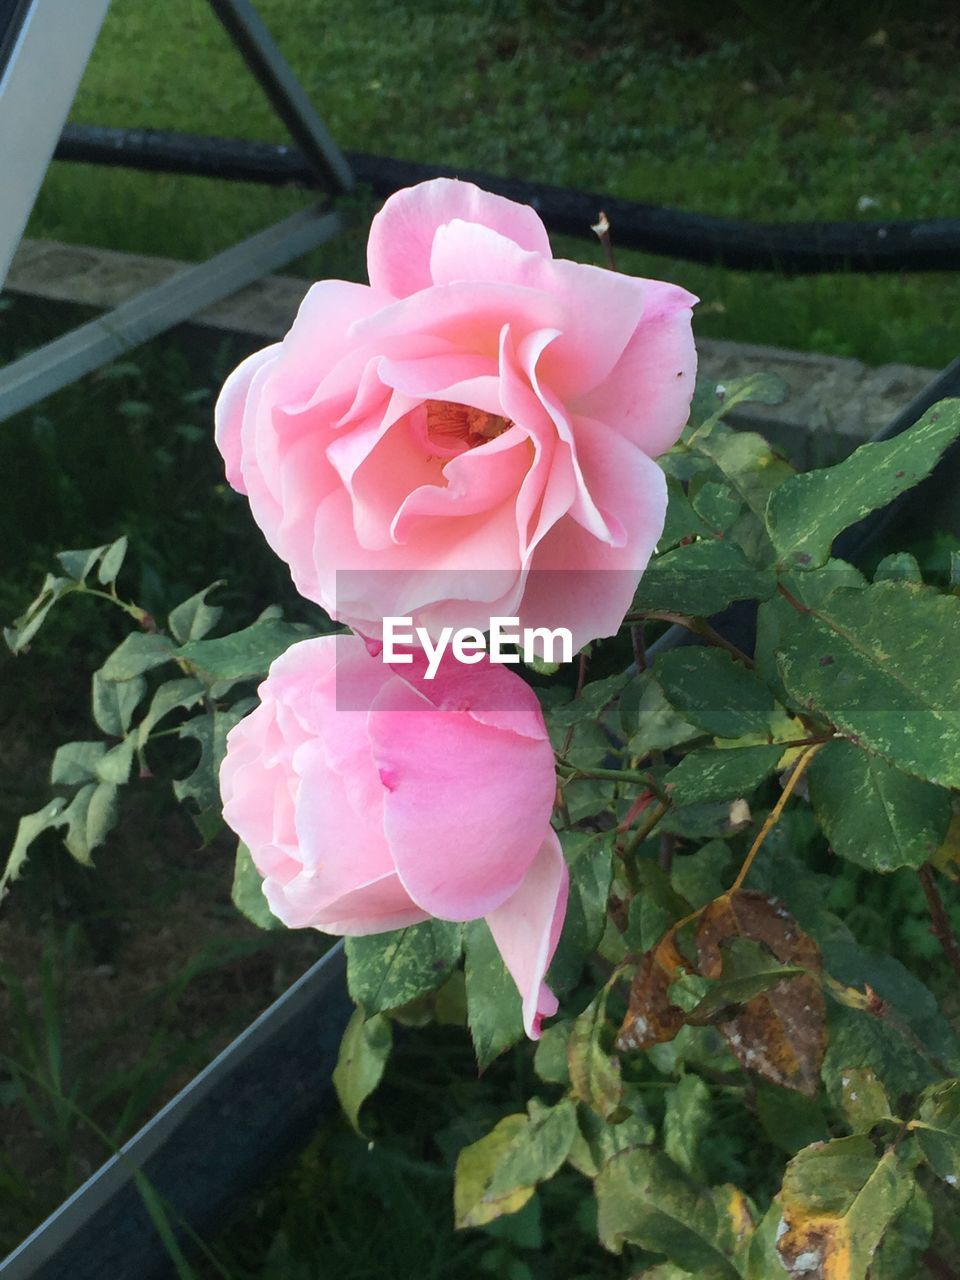 CLOSE-UP OF PINK ROSE BLOOMING IN GARDEN